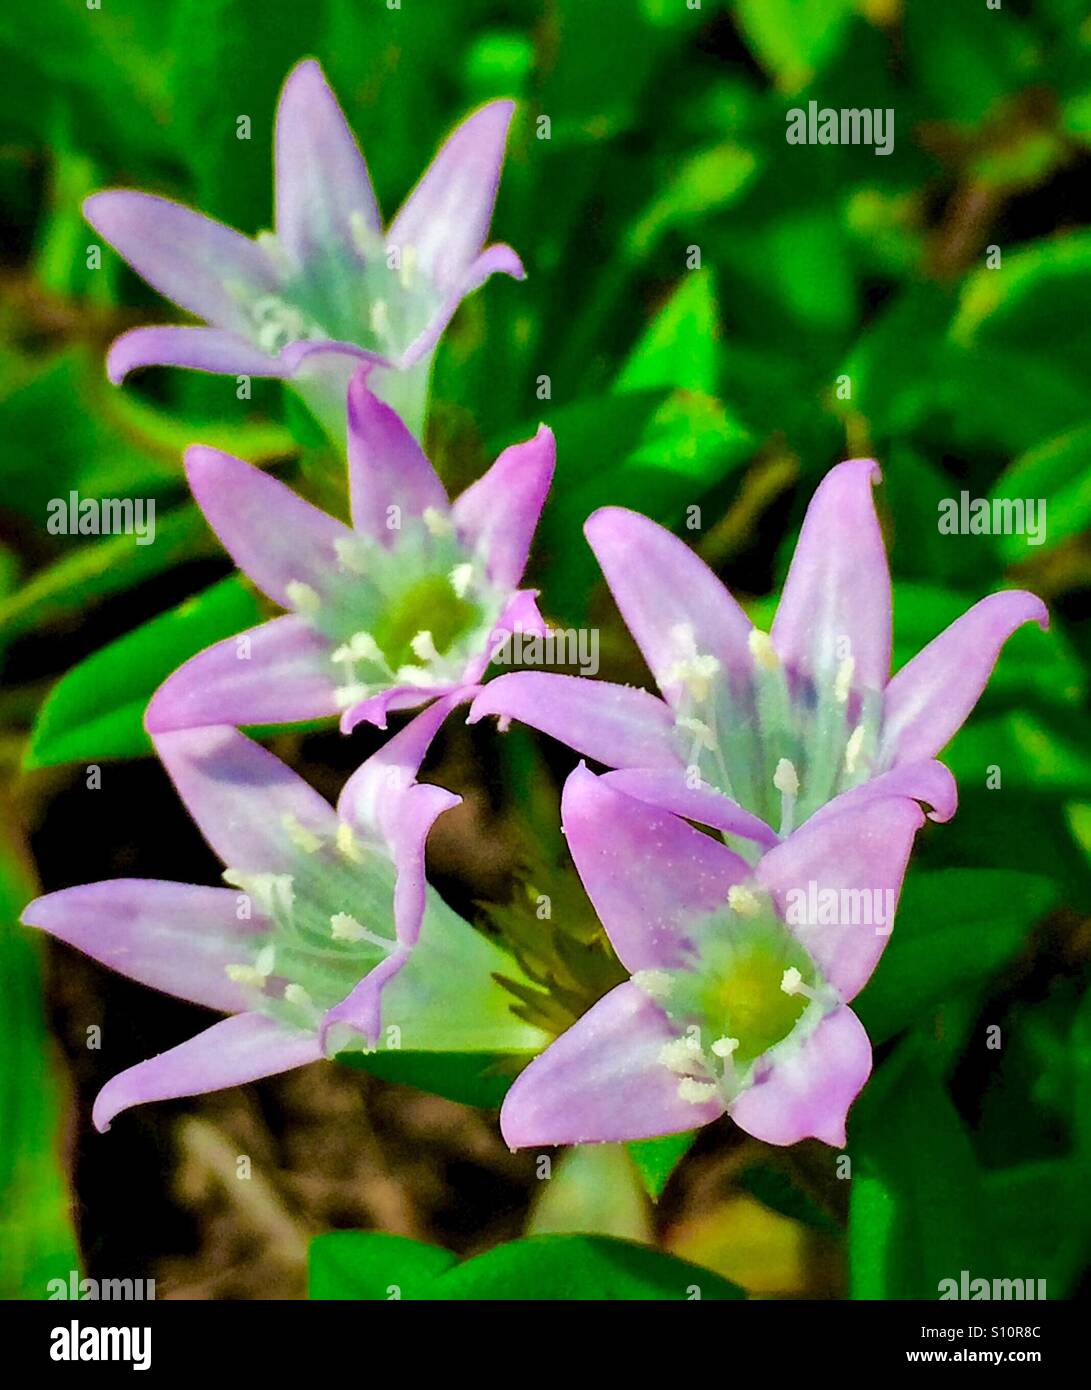 Macro view of tiny purple and white flowers with green leaf background, Richardia grandiflora Stock Photo